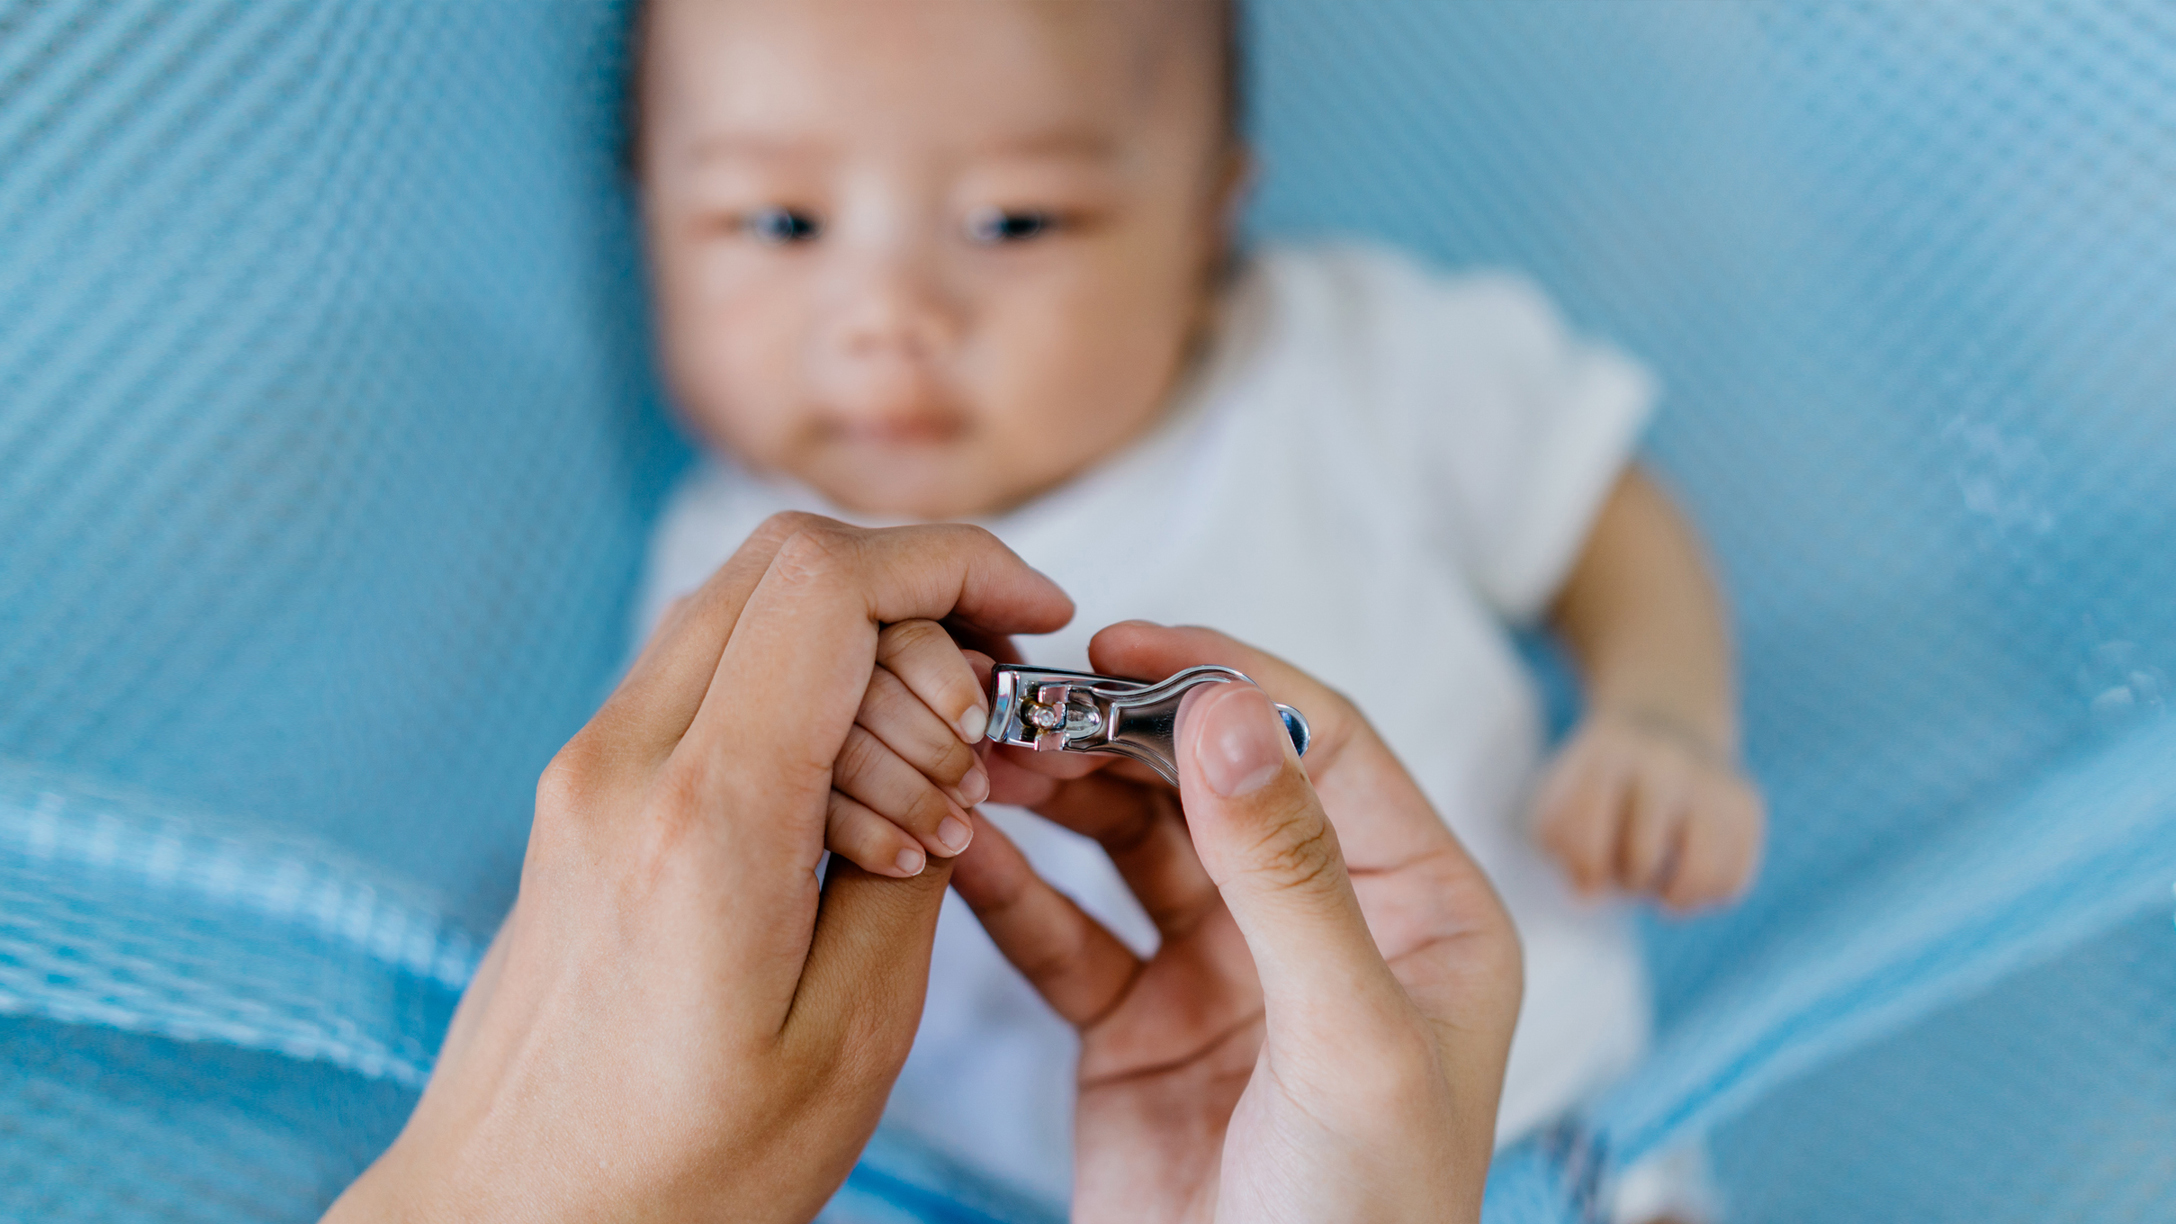 When and How Do I Trim My Newborn's Nails? 